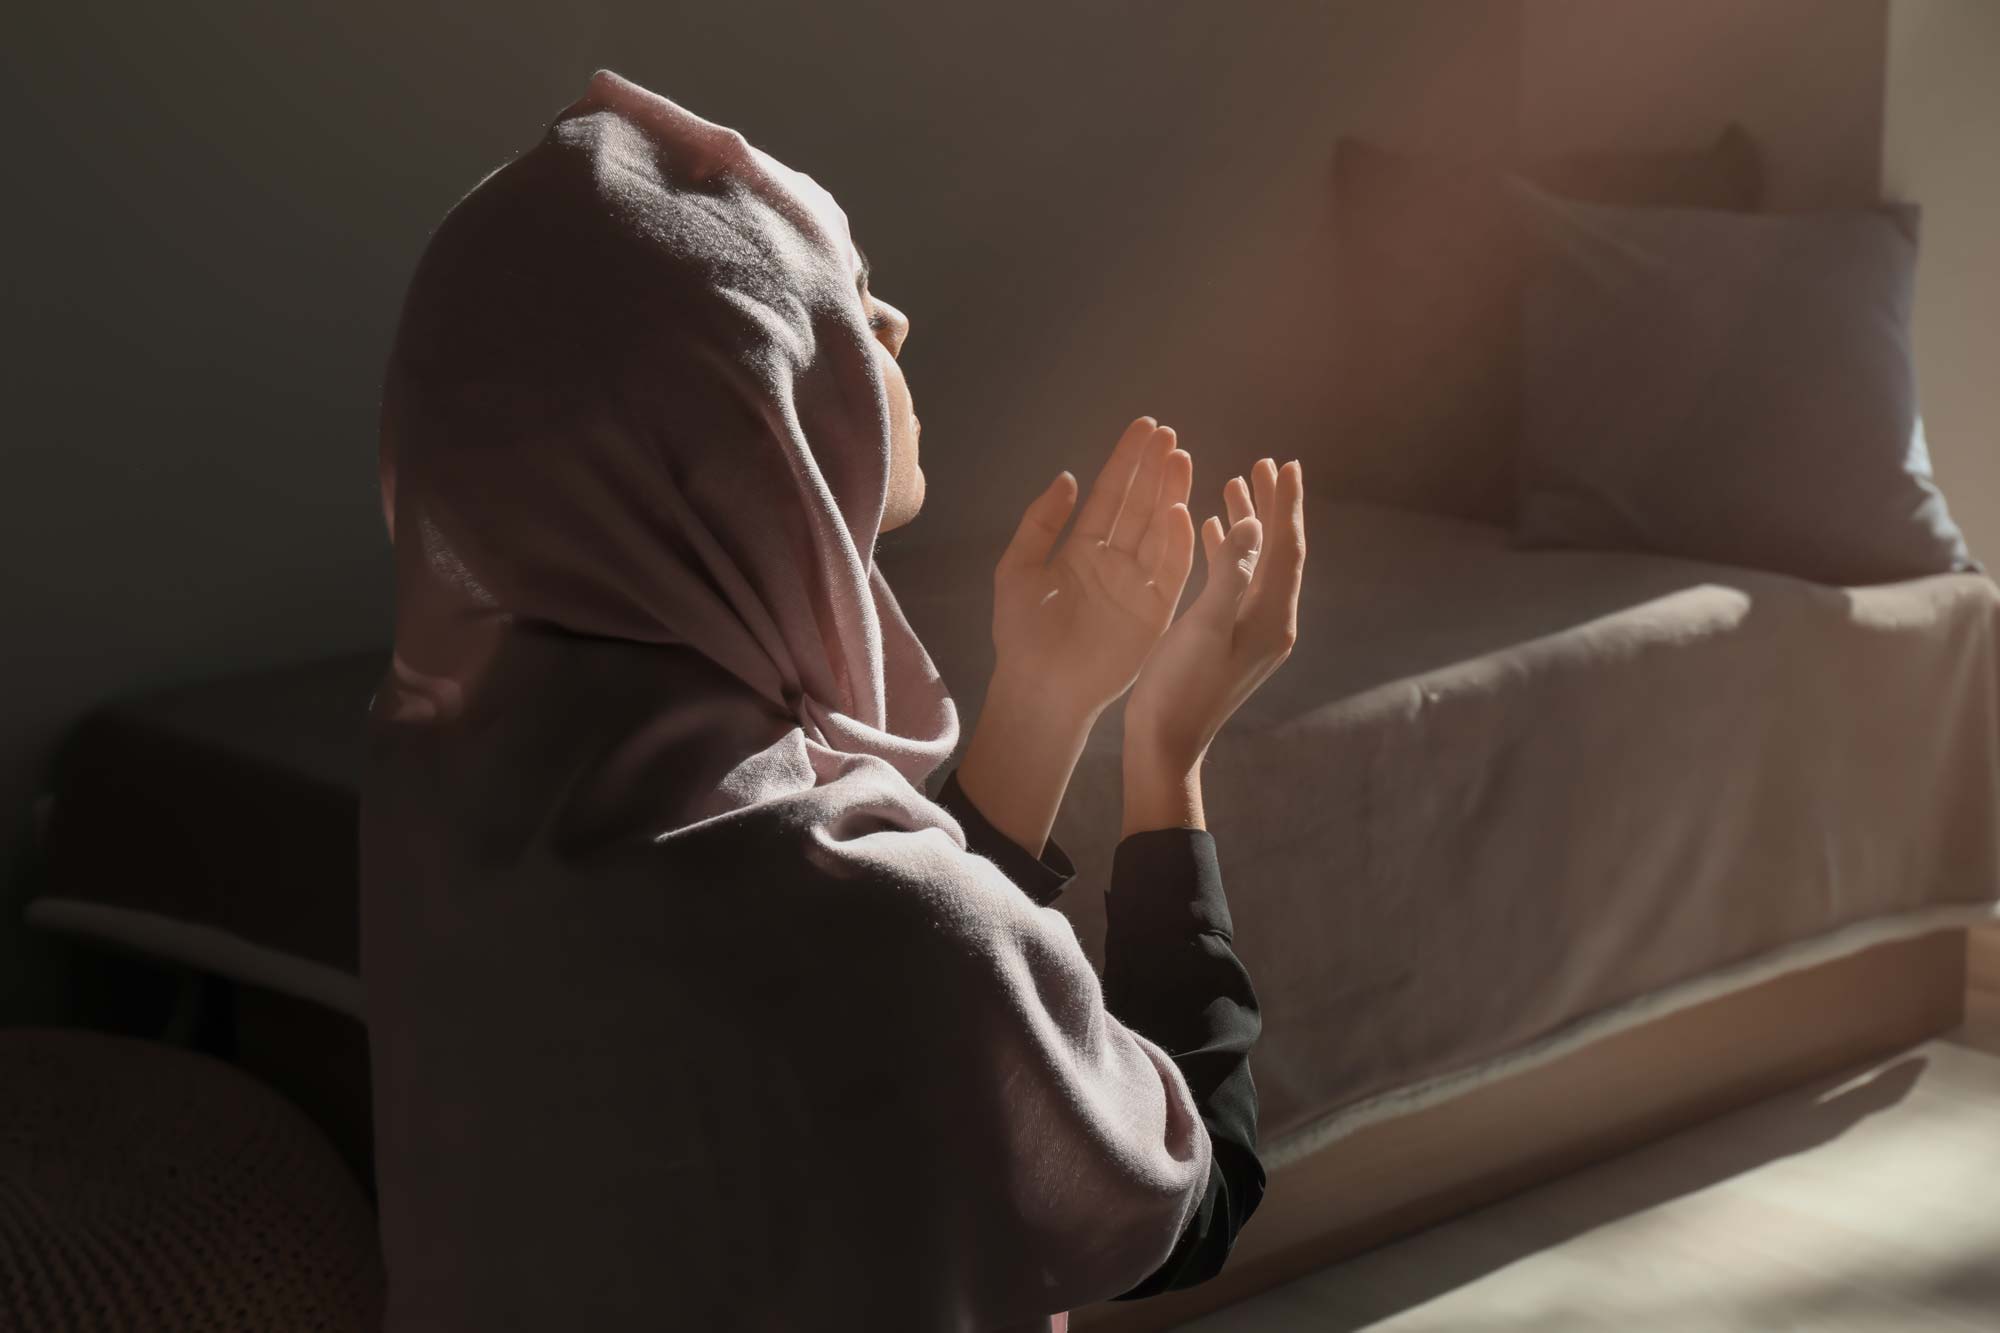 Mom Keeps Asking Me to Pray But I Refuse - About Islam